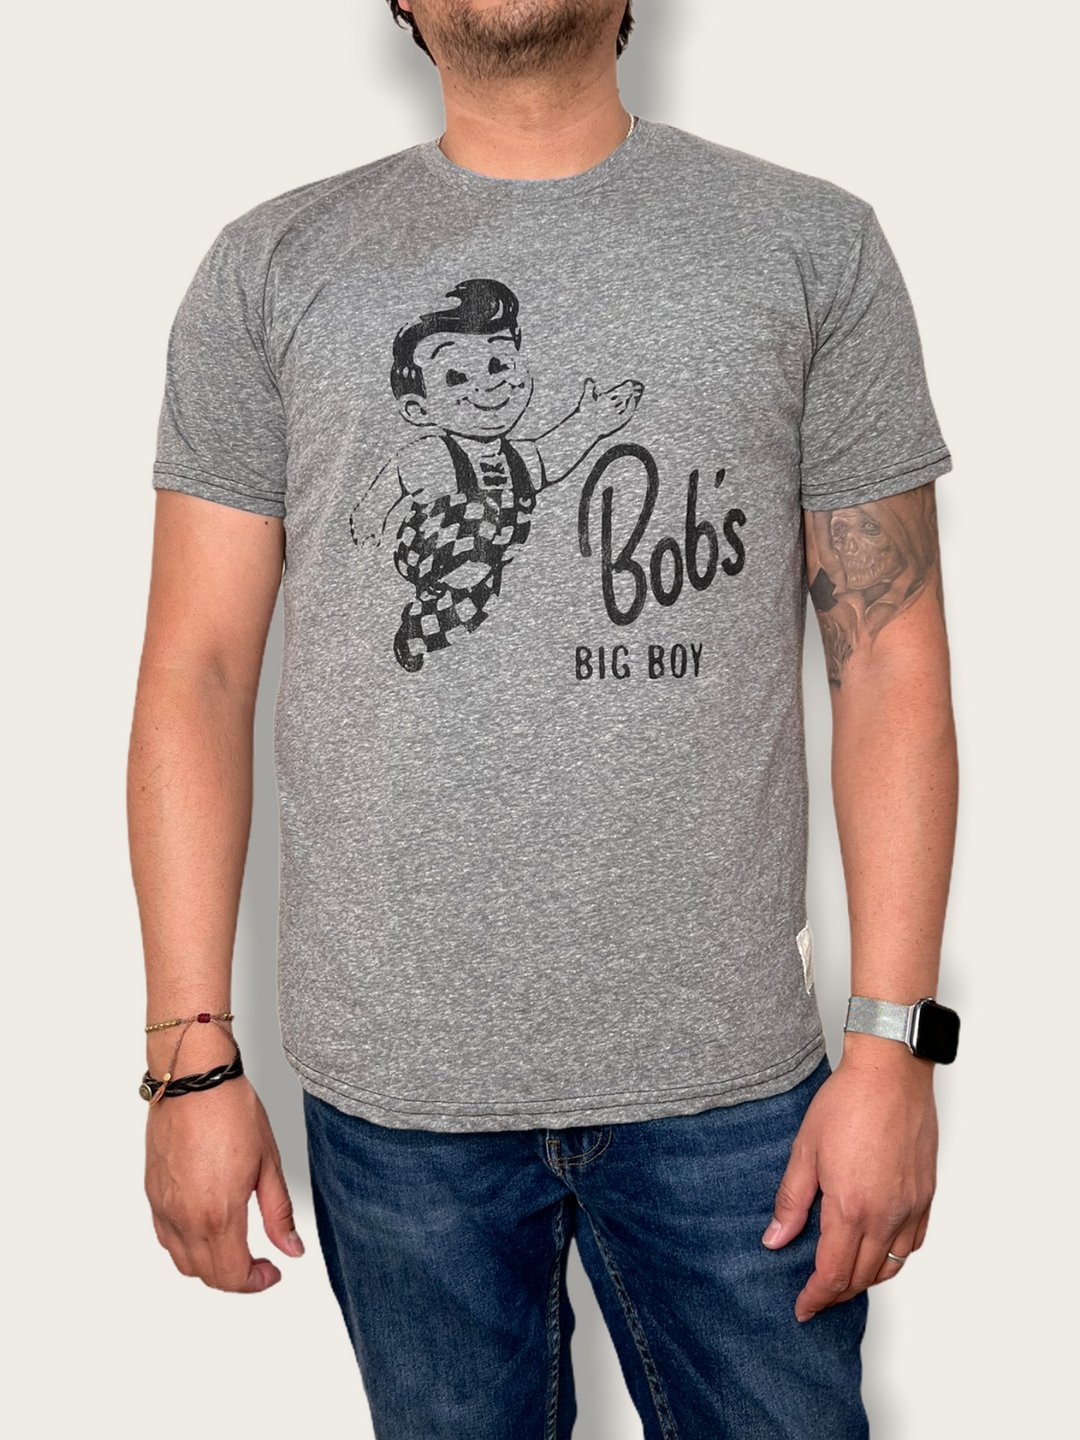 BOB'S TEE - Kingfisher Road - Online Boutique